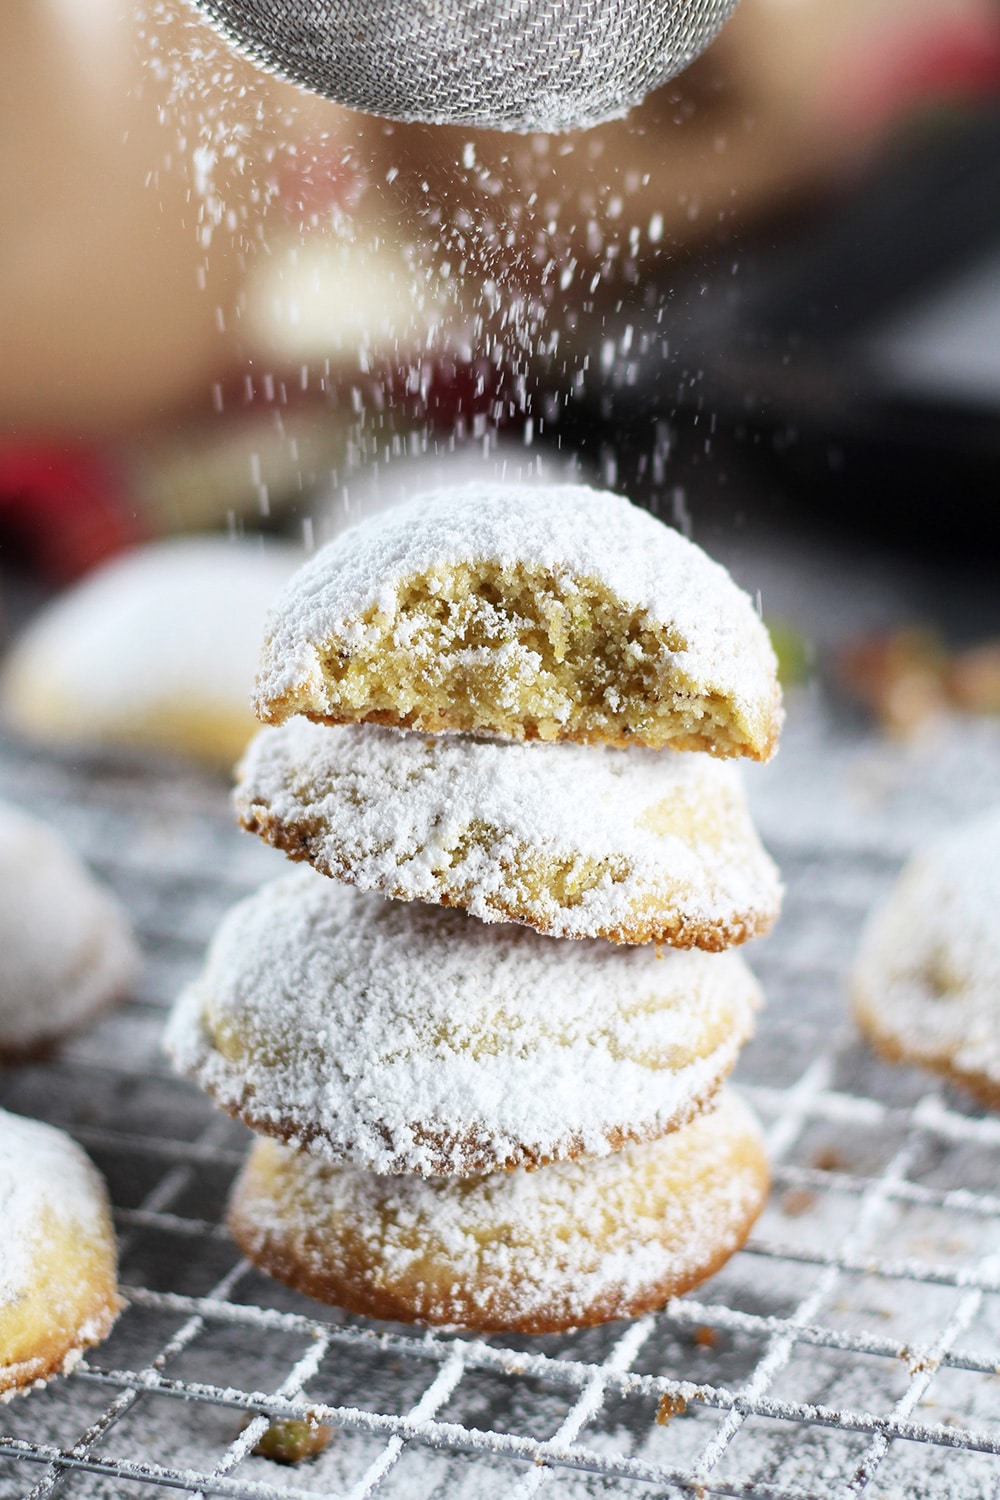 These Greek Butter Cookies (Kourabiedes) are usually made on Christmas or other holidays. They are tender, buttery, and stuffed with pistachios! | cookingtheglobe.com